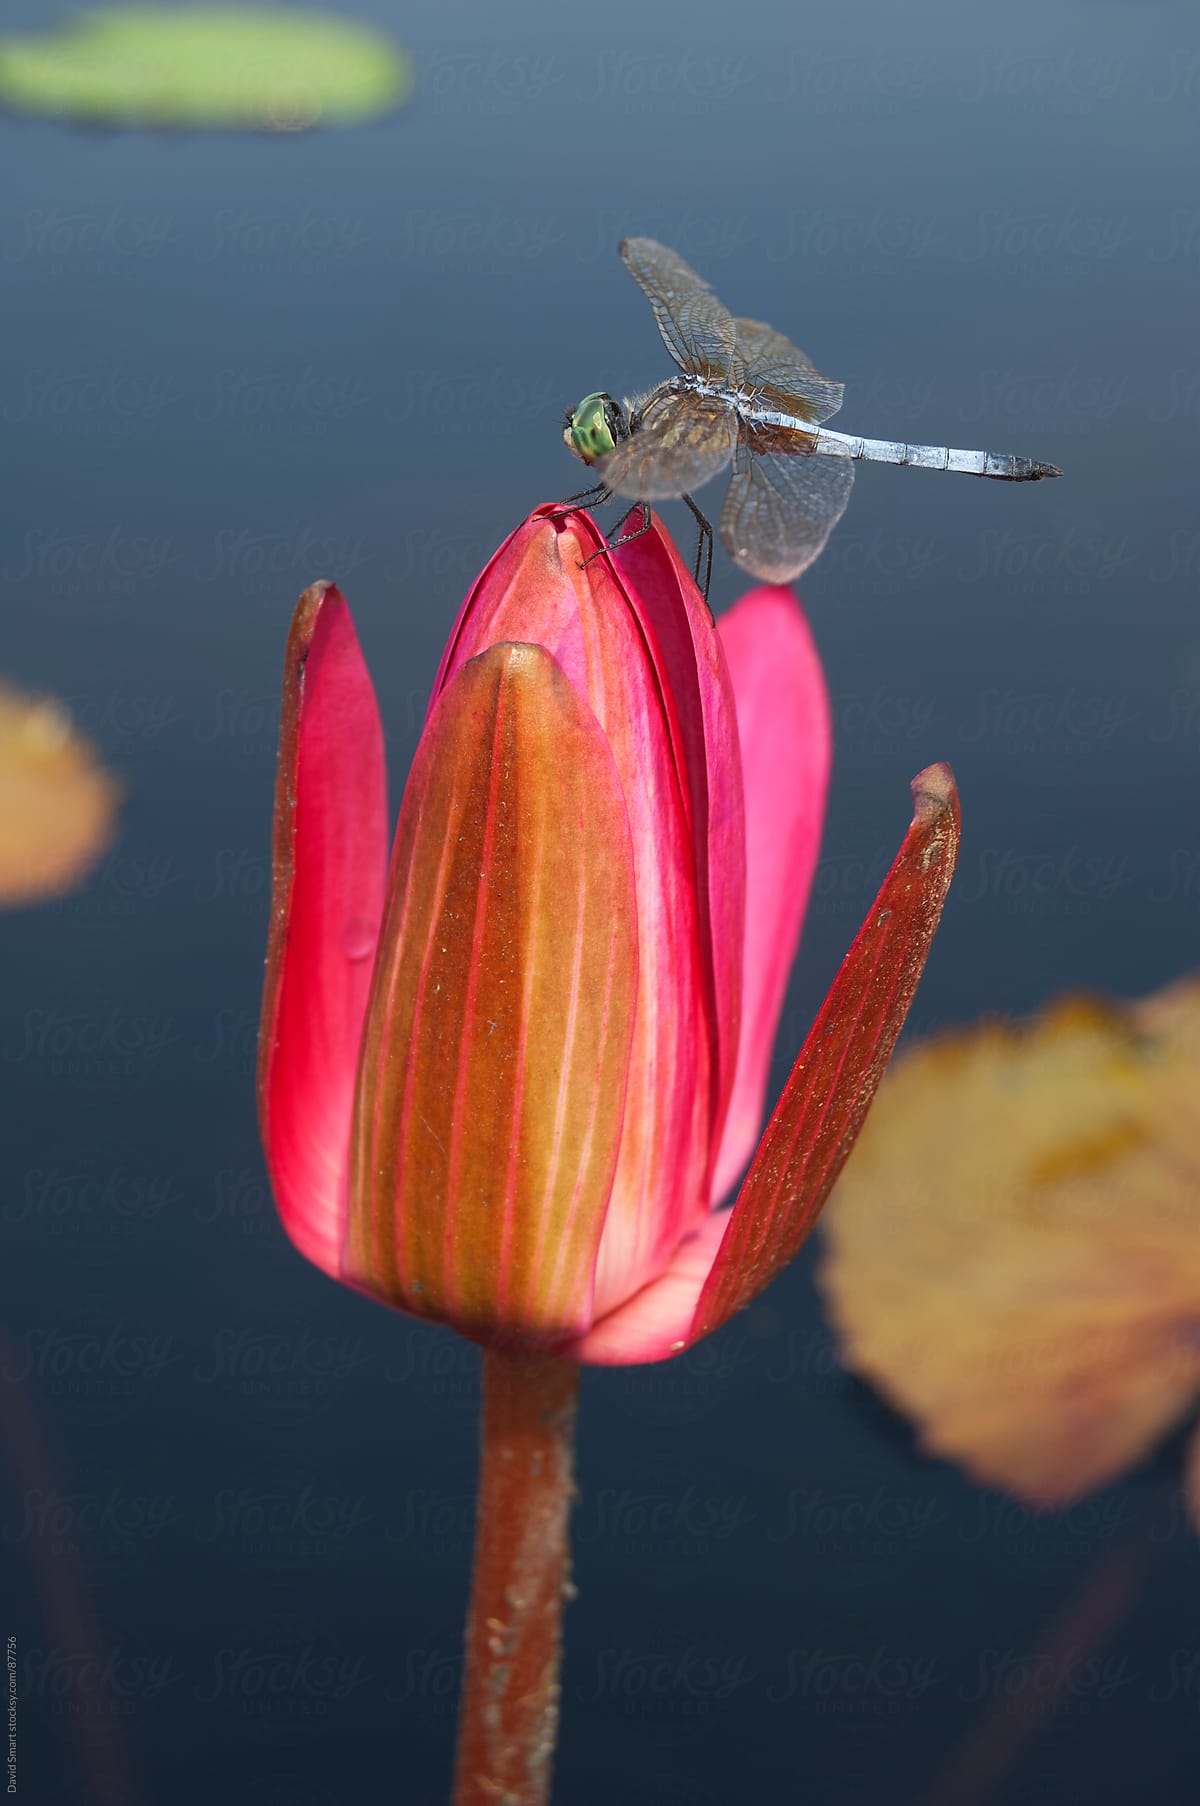 Blue Dasher dragonfly perched on a waterlily bud